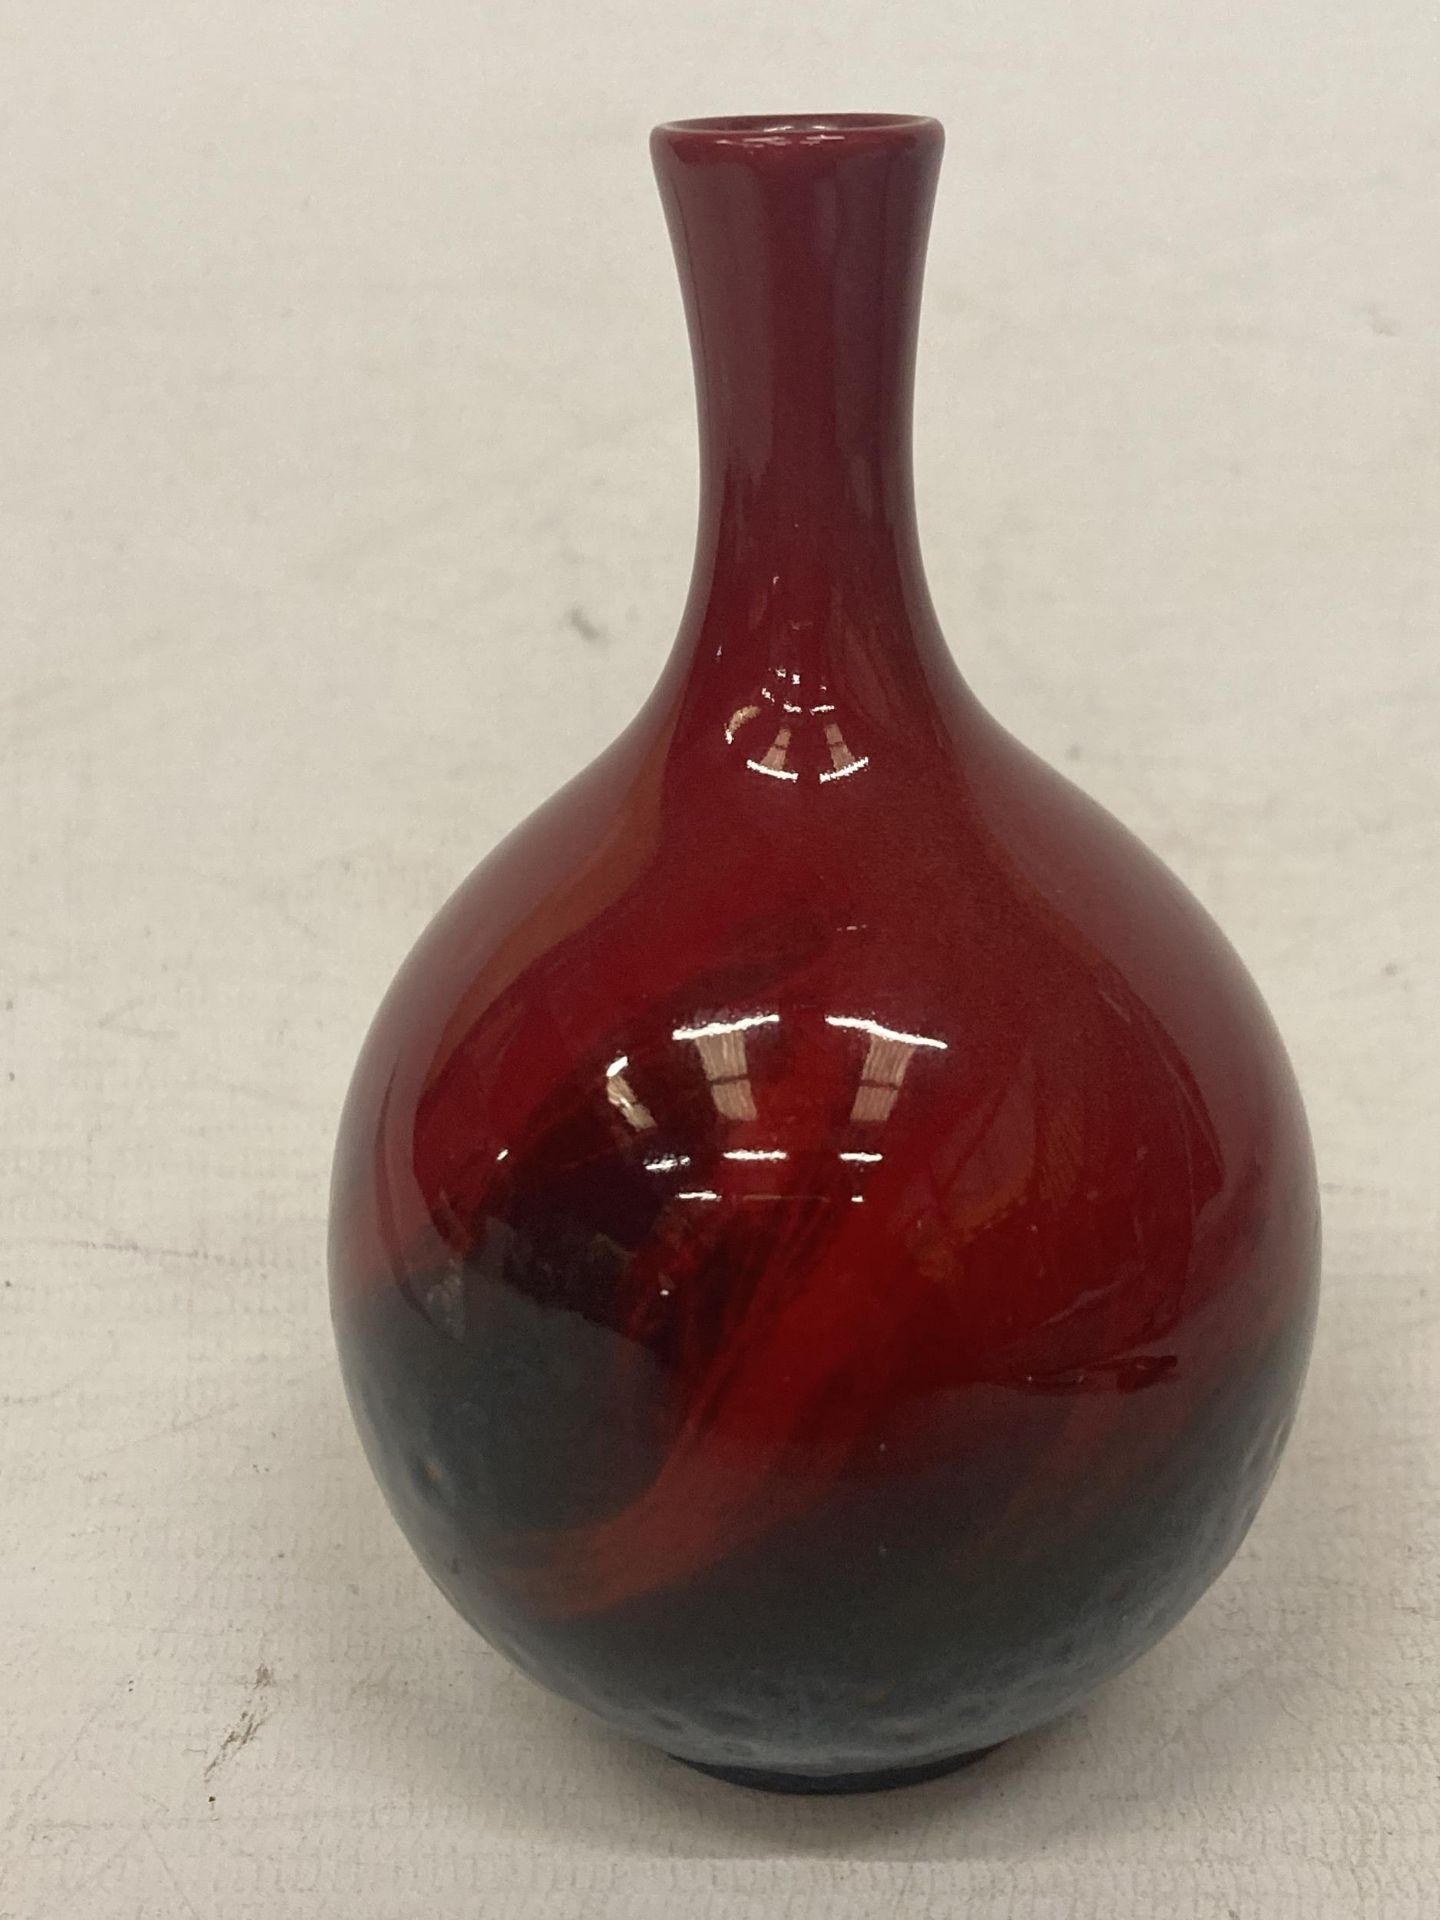 A ROYAL DOULTON FLAMBE VEINED VASE - Image 2 of 3